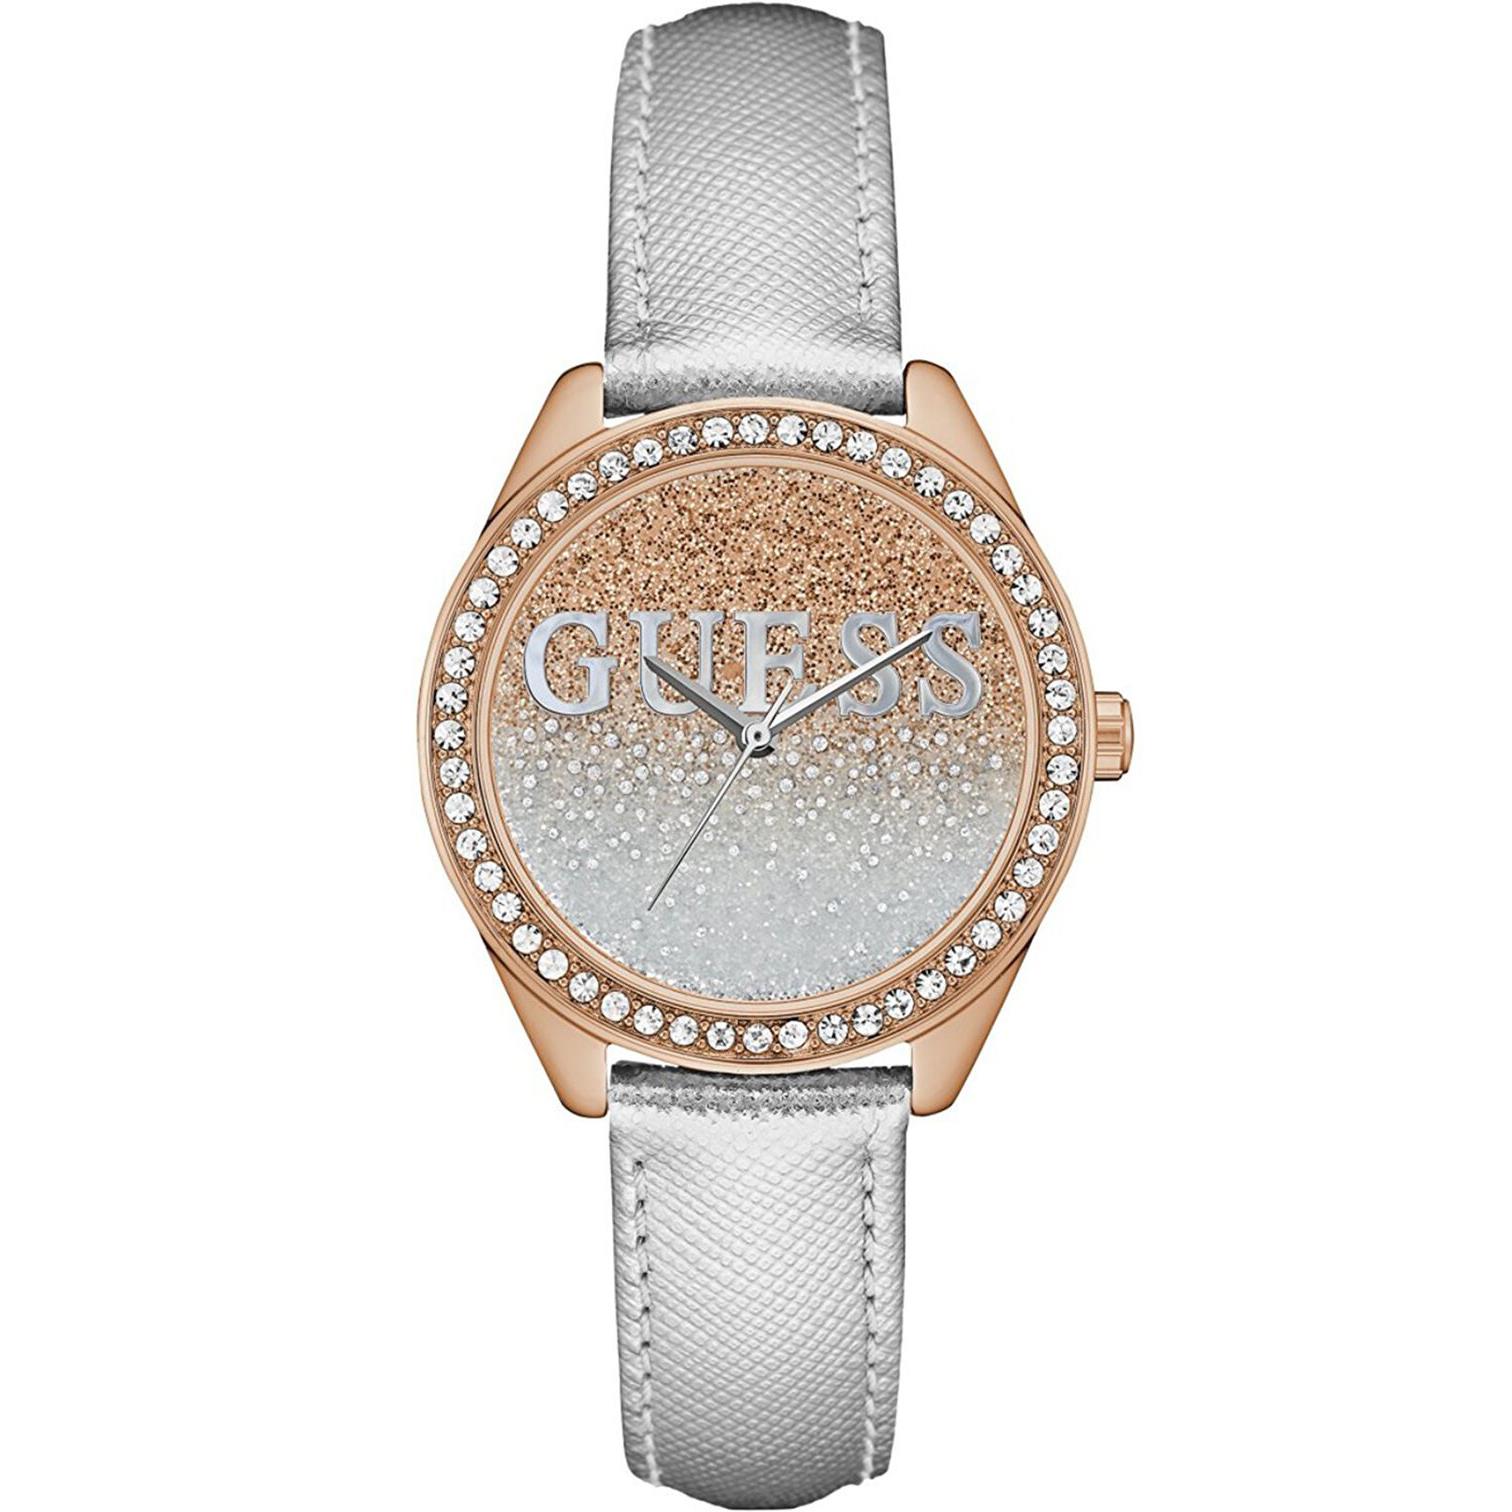 Guess W0823L7 Ladies Dress Stainless Steel Gold-tone Crystal Accented Bezel